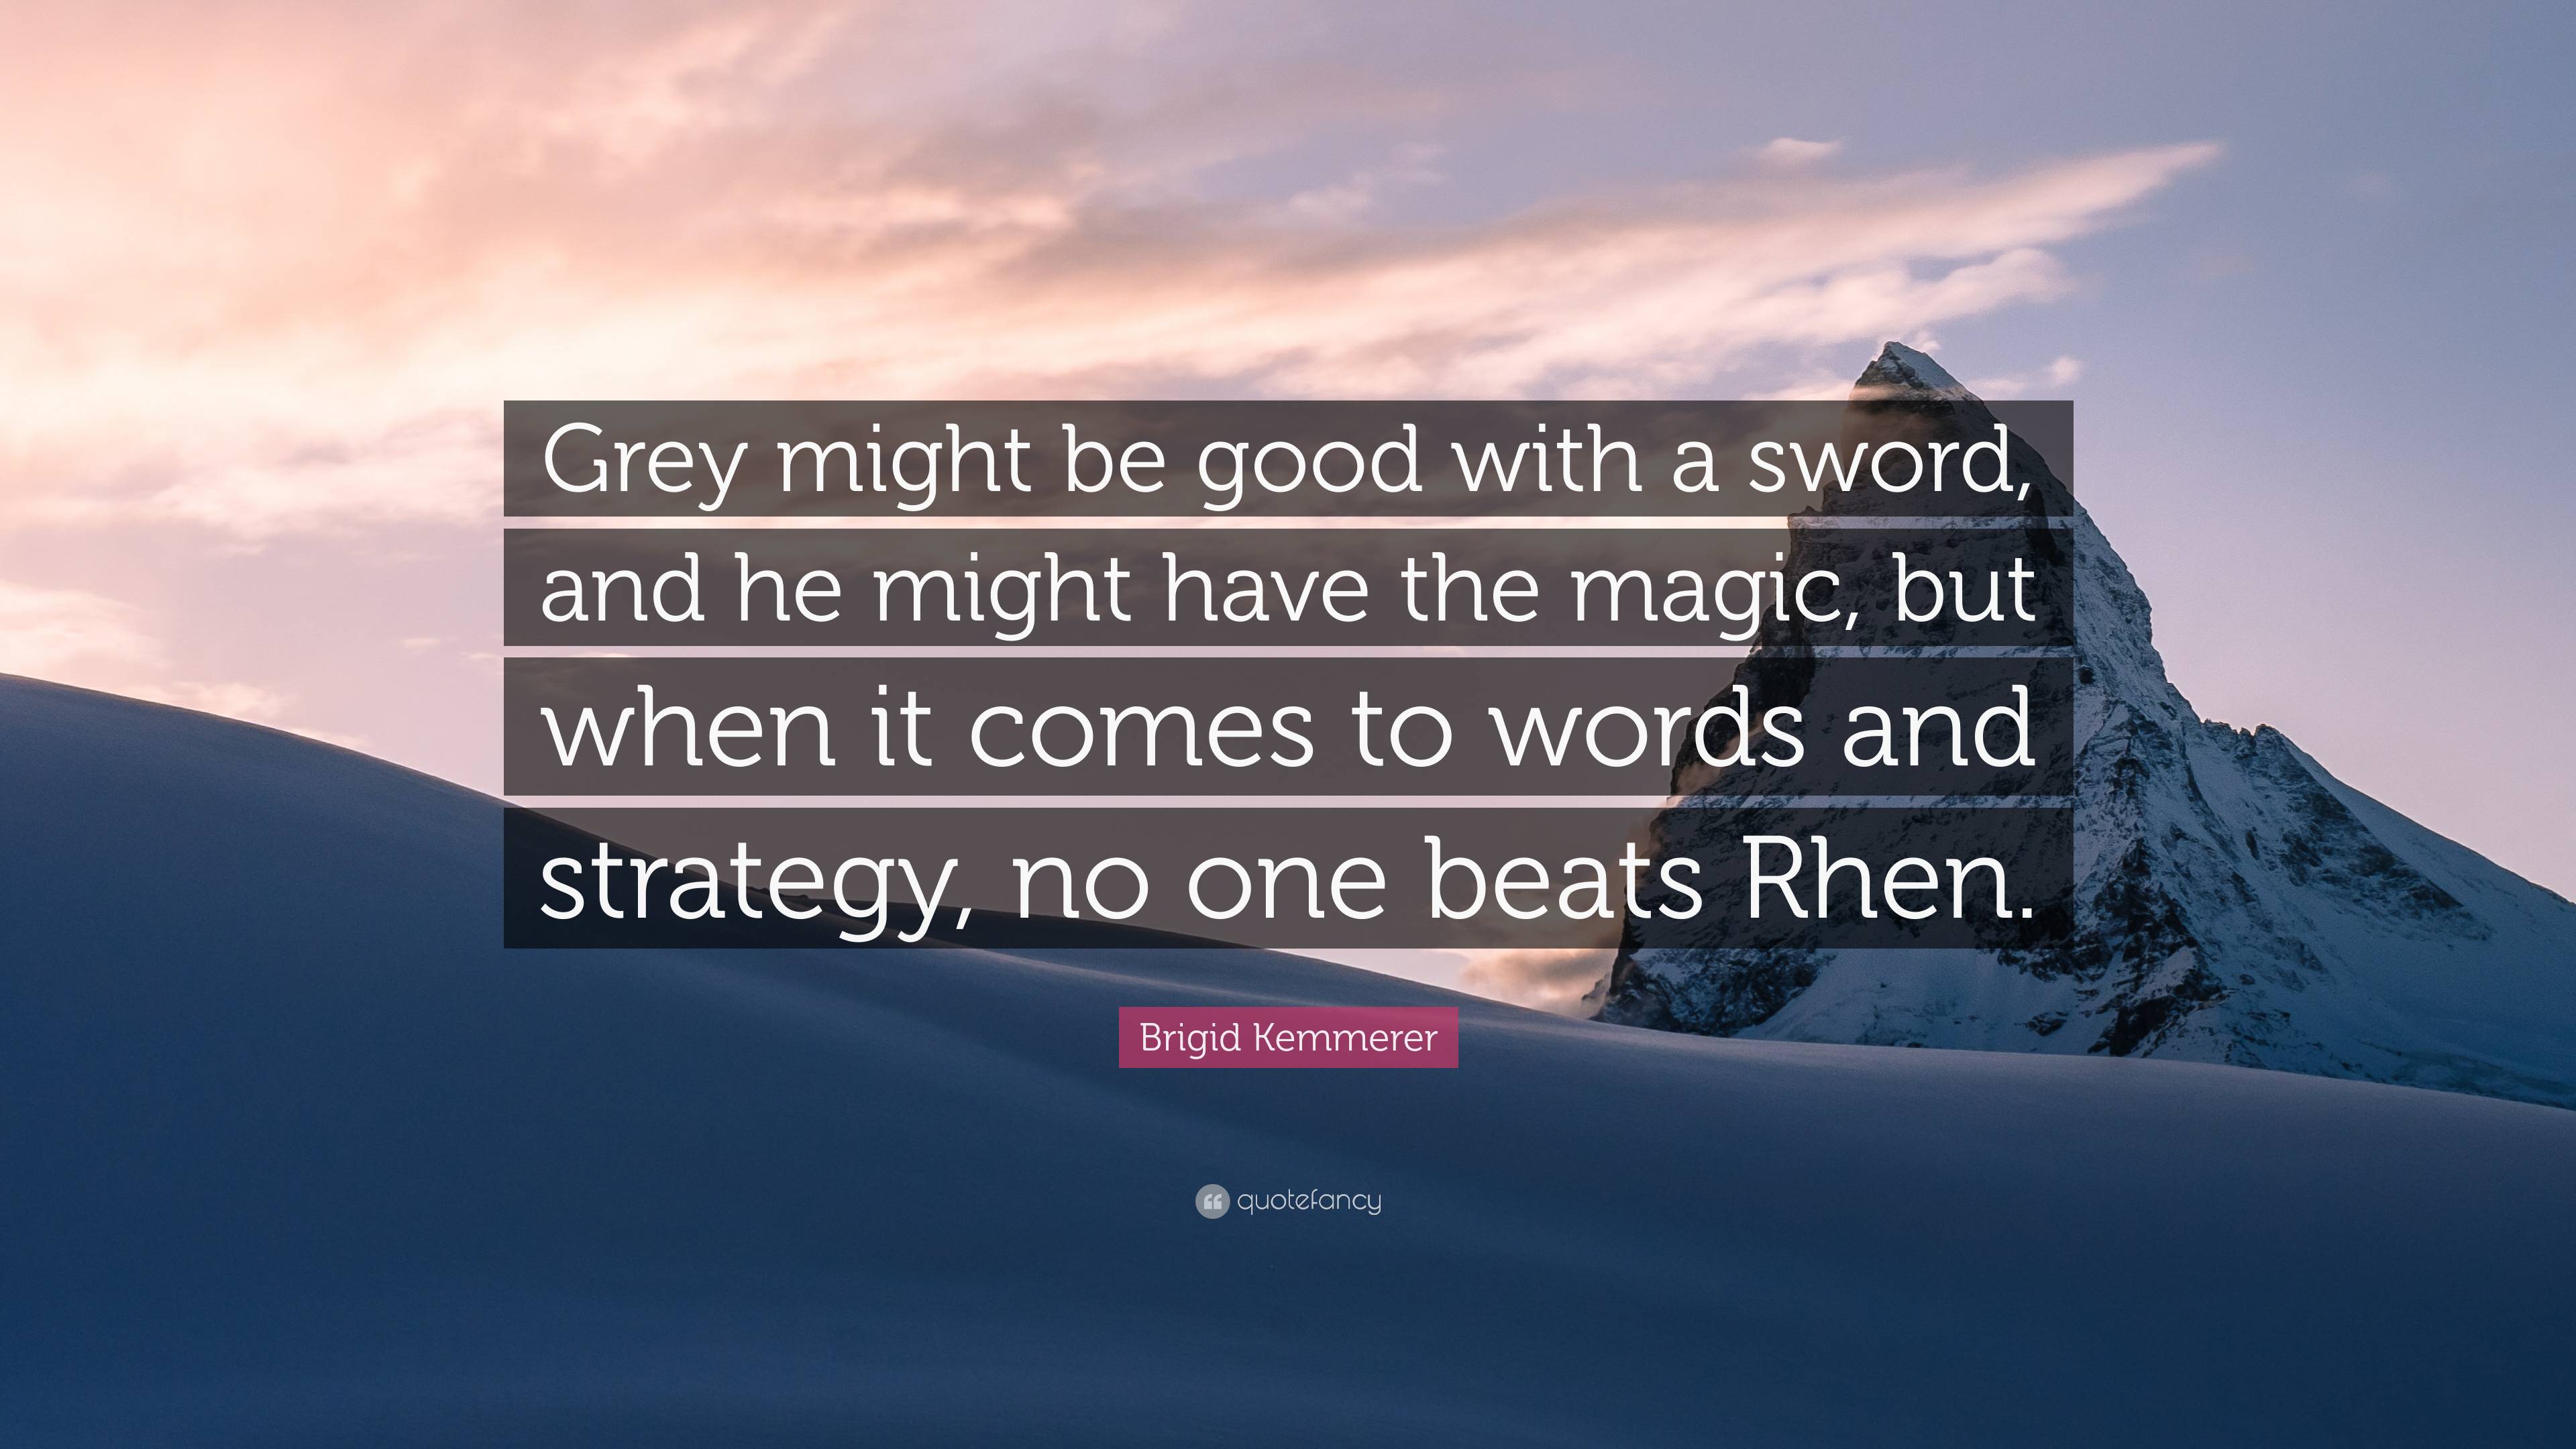 Brigid Kemmerer Quote: “Grey might be good with a sword, and he might ...